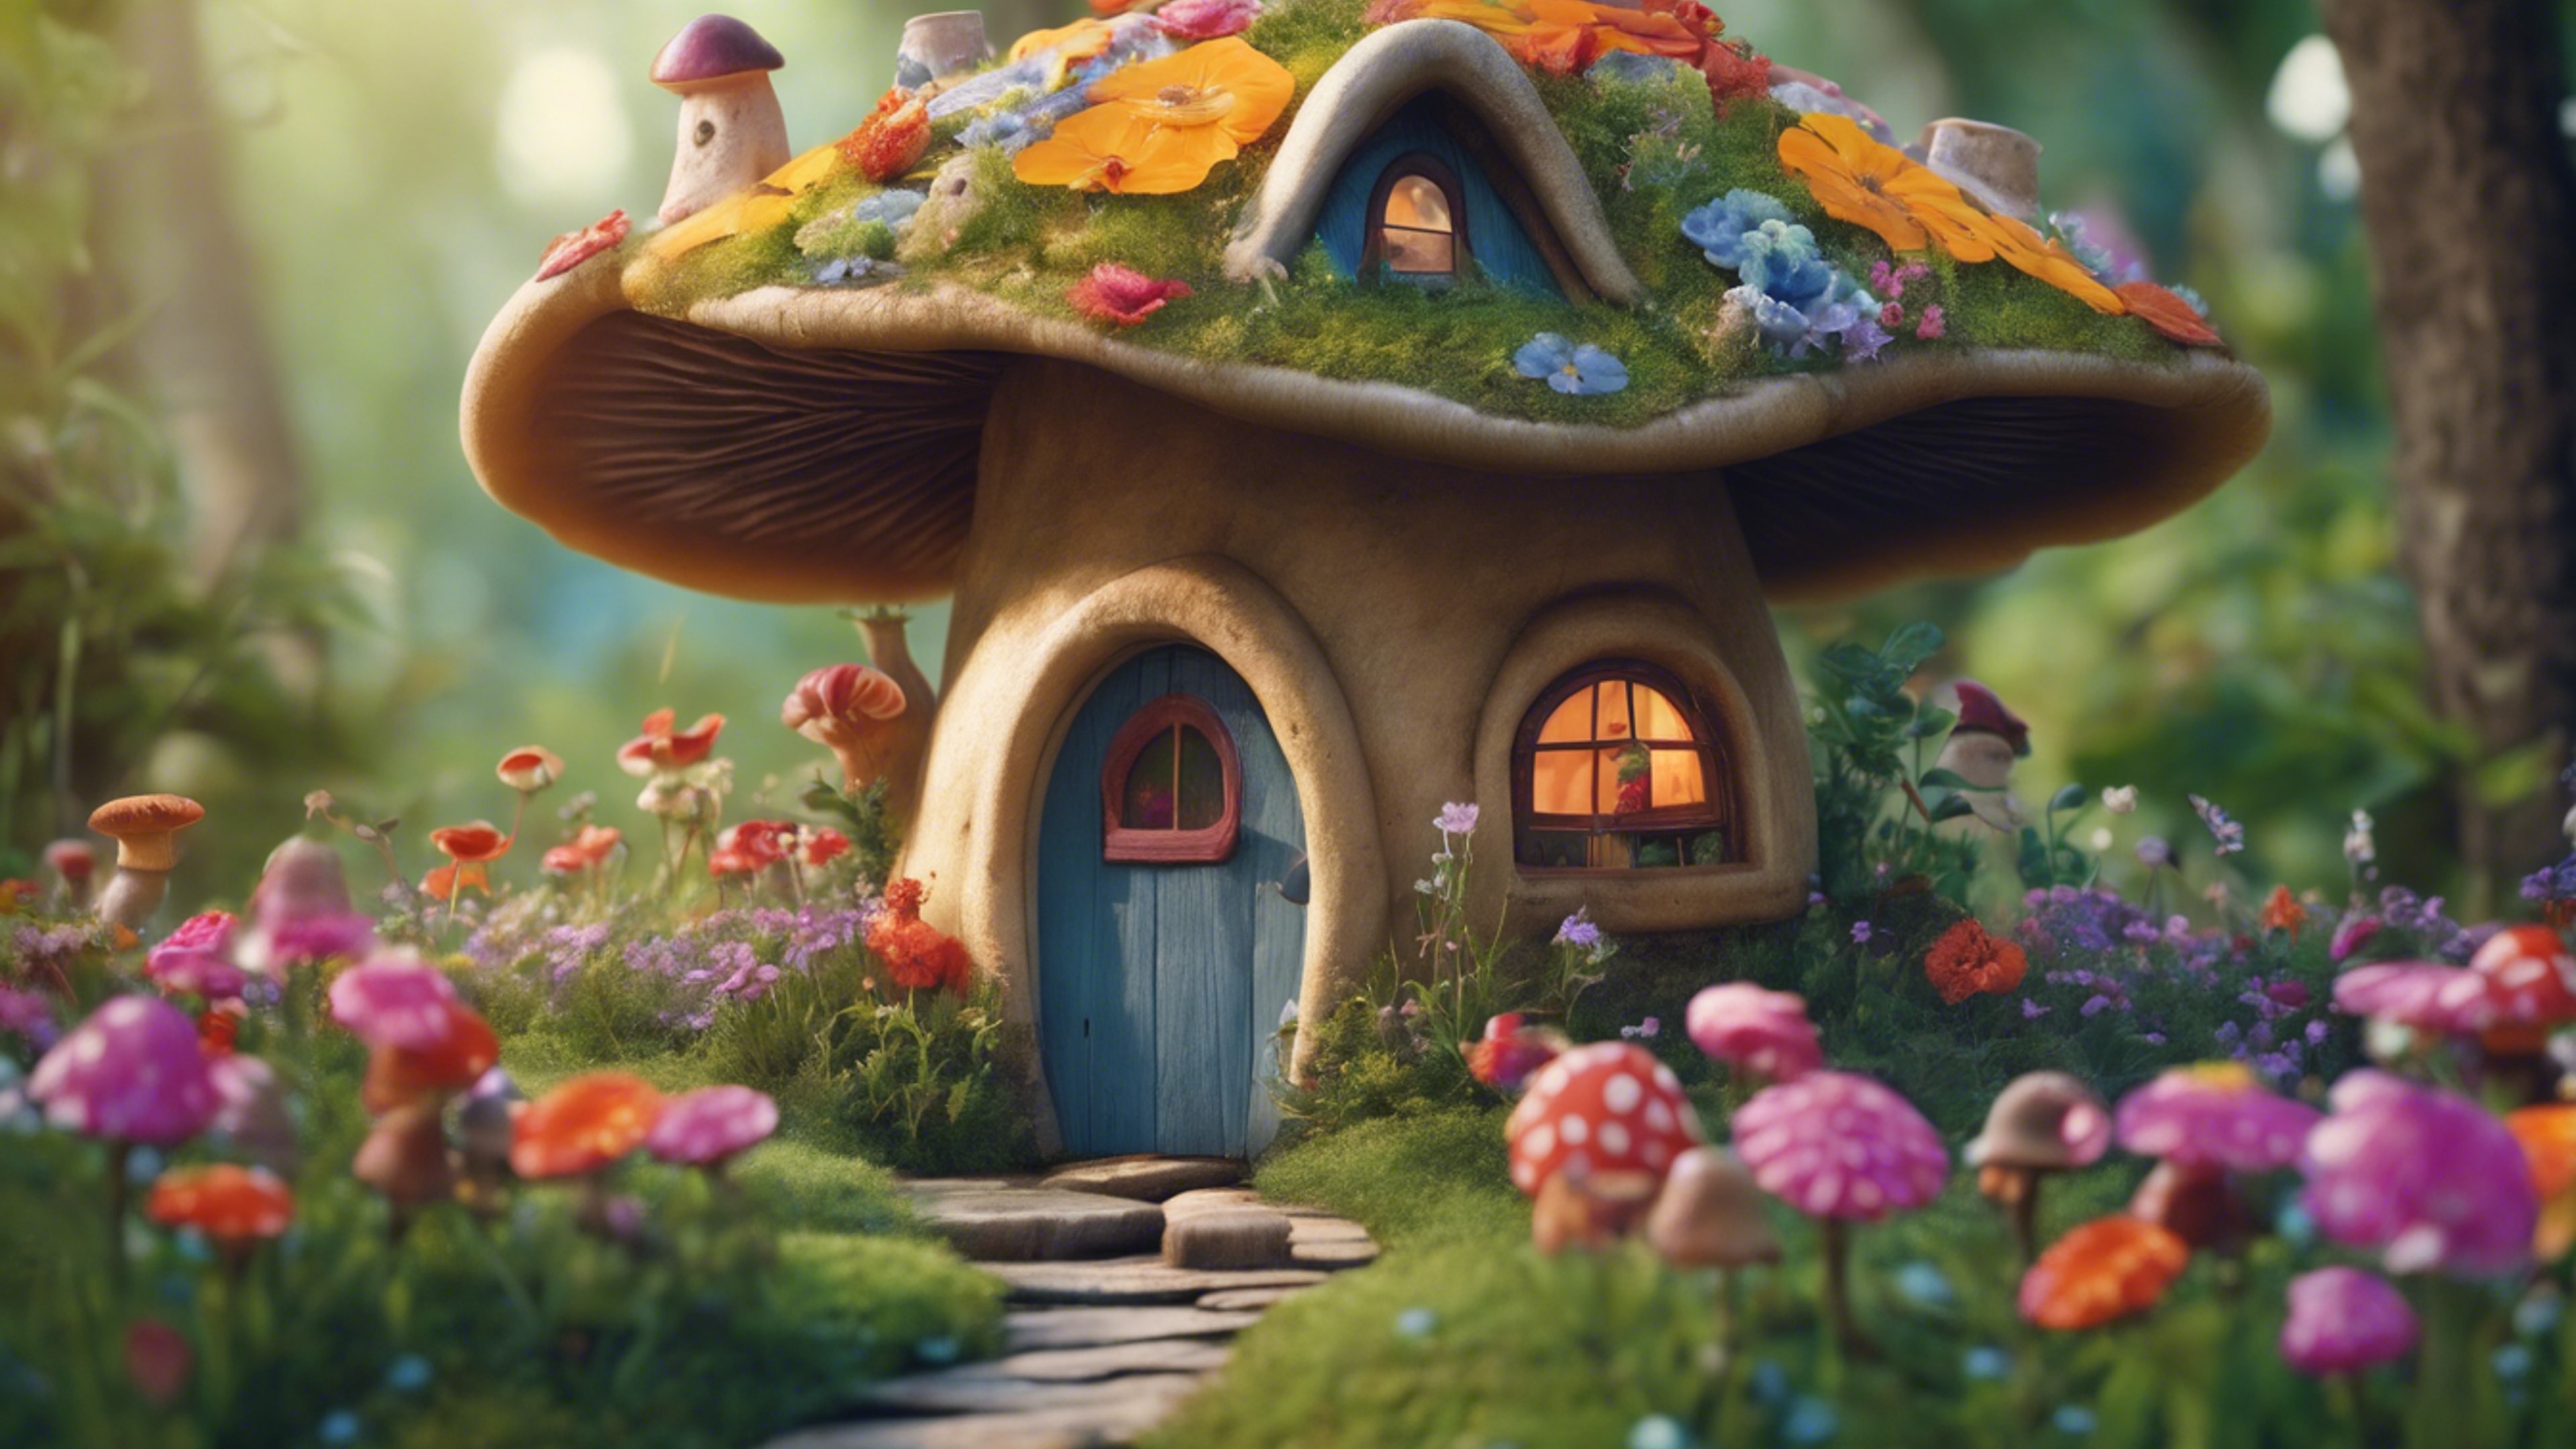 An old-fashioned, whimsical mushroom house, straight out of a children's storybook, nestled amid colorful flowers at the end of a winding path. Wallpaper[bbbff29f860842789321]